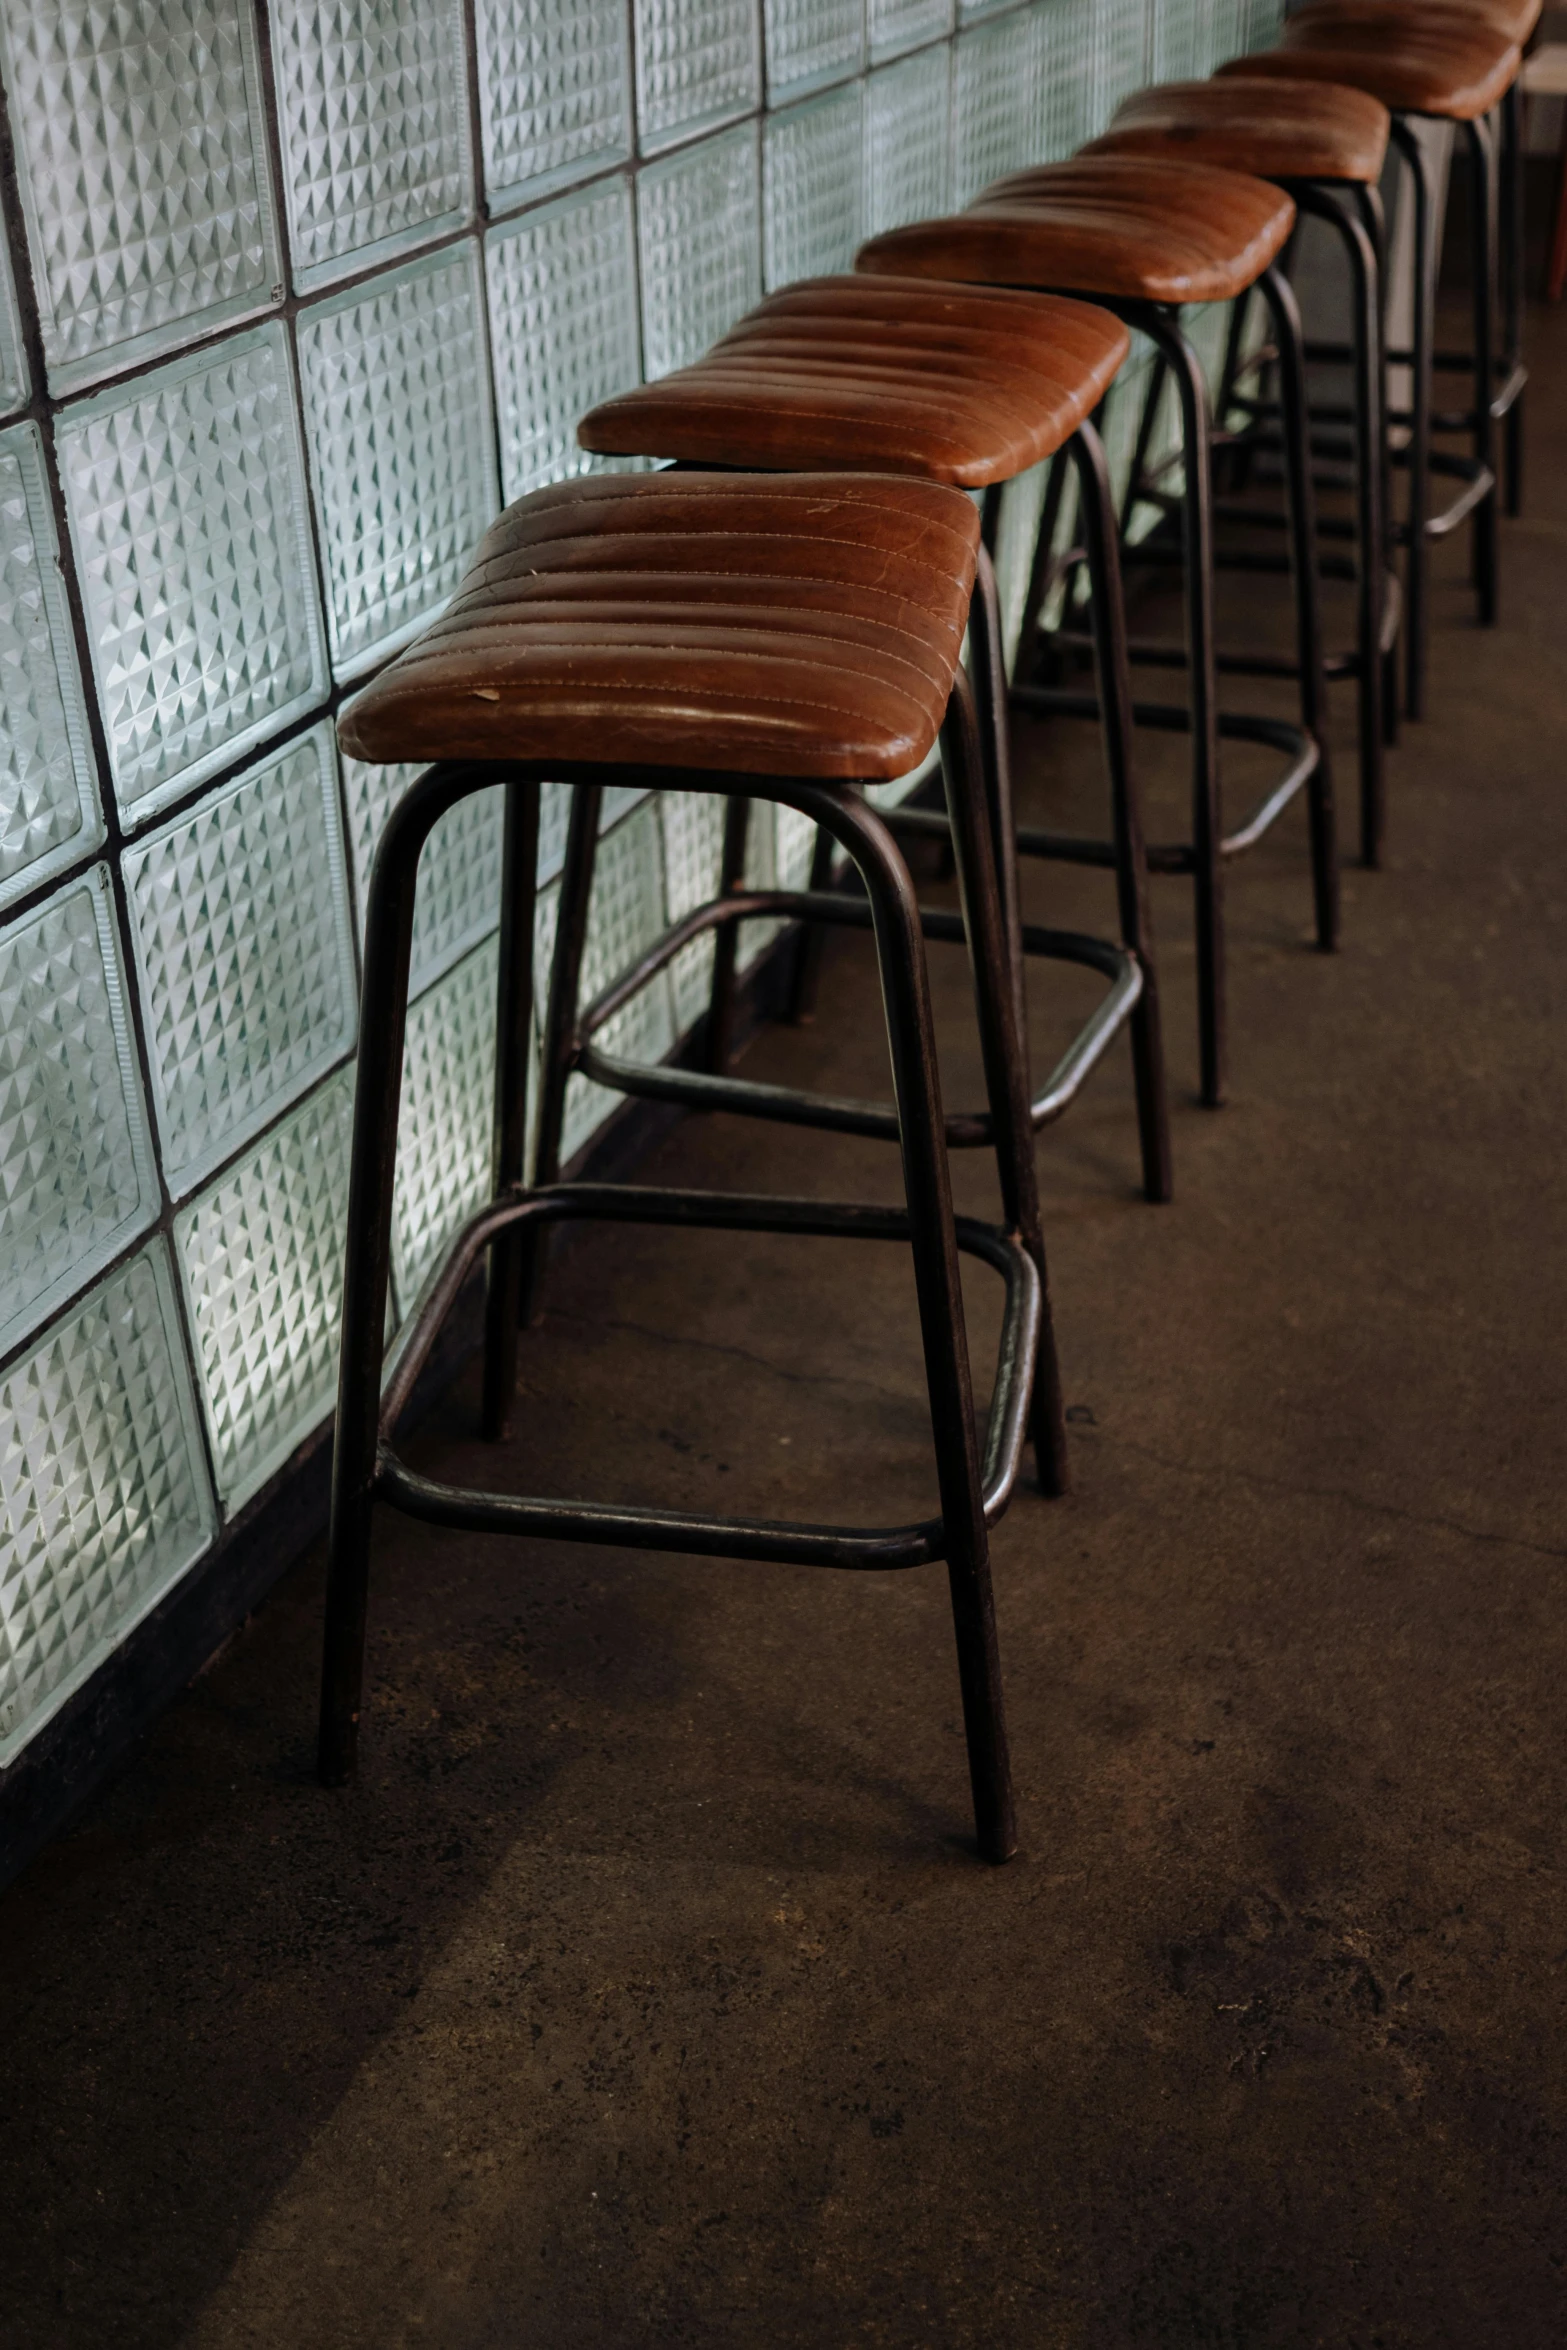 a row of bar stools lined up against a wall, a portrait, unsplash, wearing leather, square, faded worn, portrait n - 9